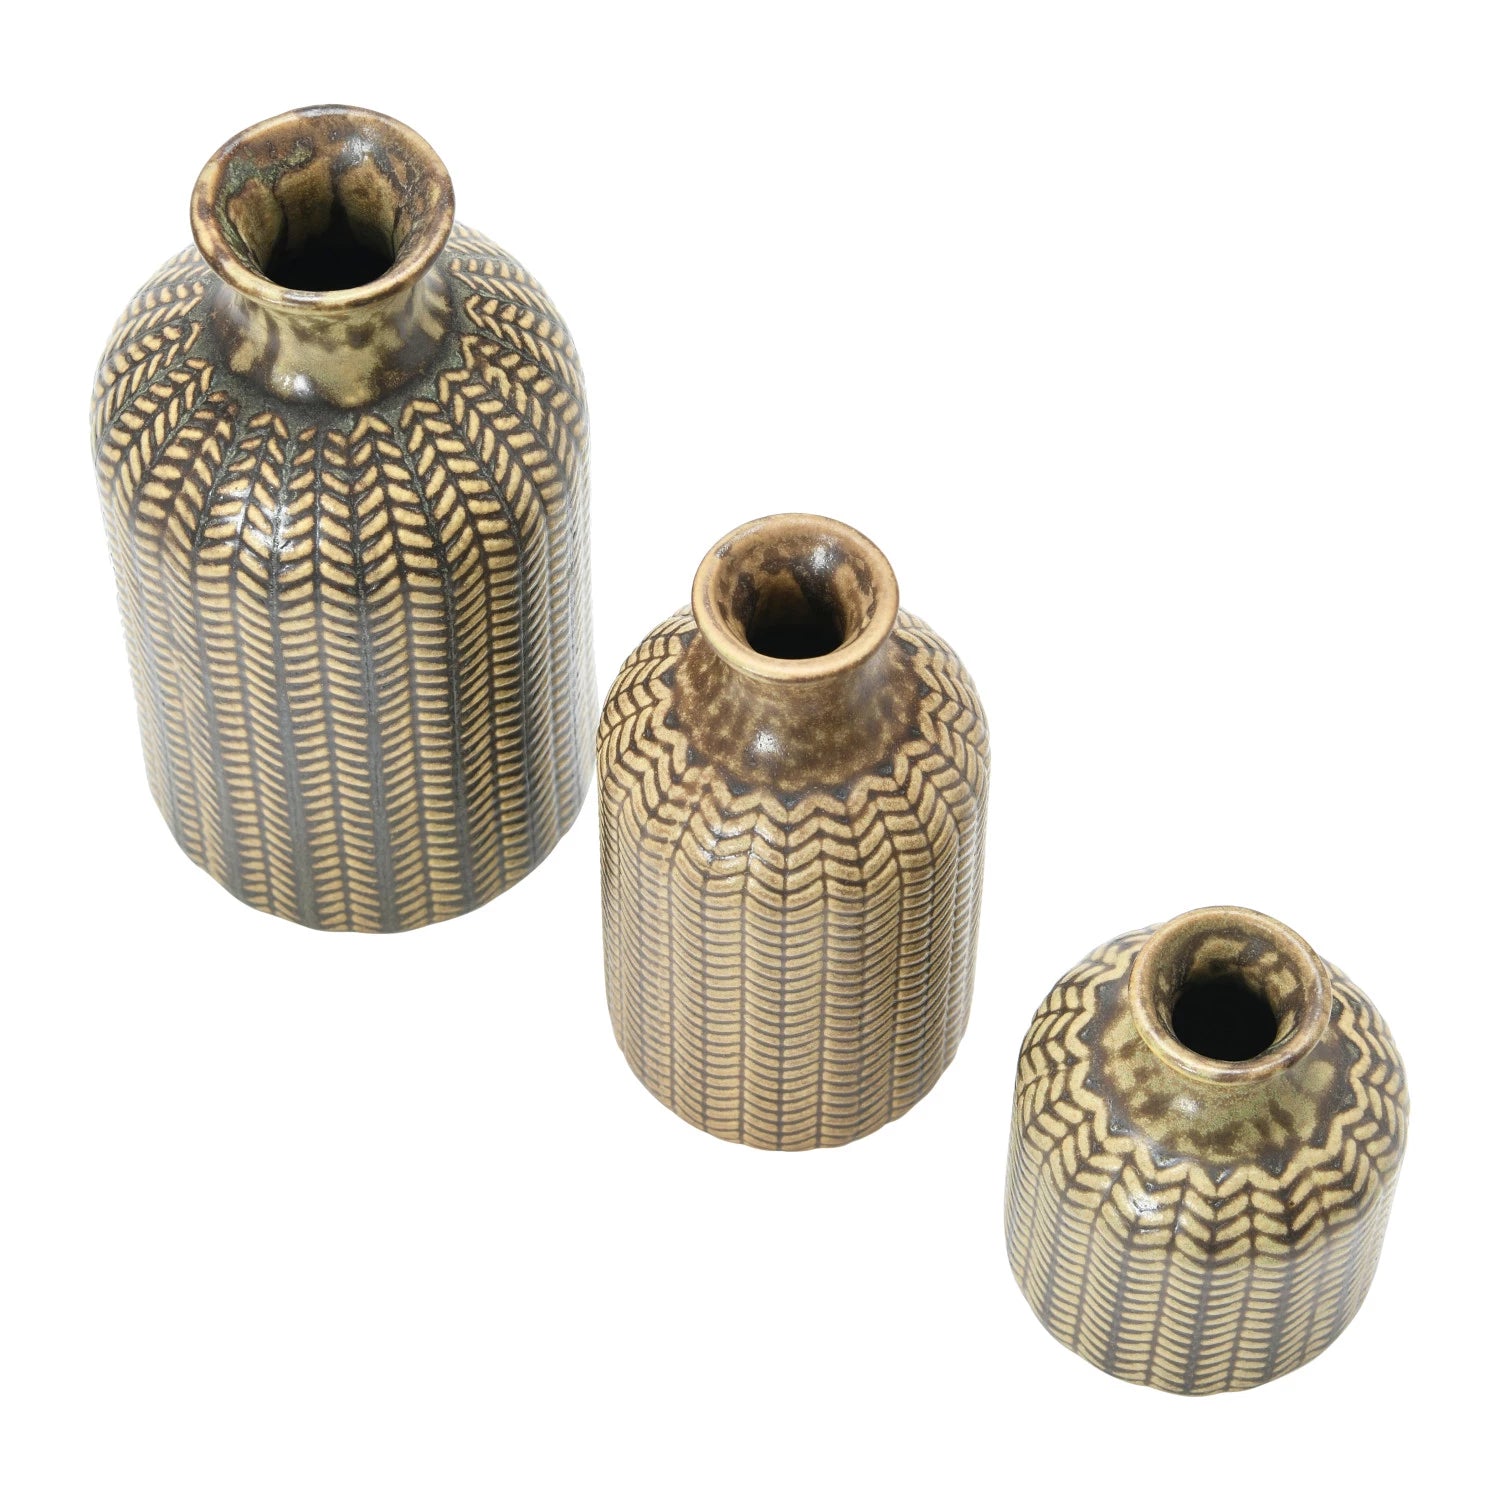 top view of 3 sizes of Embossed Stoneware Vases.